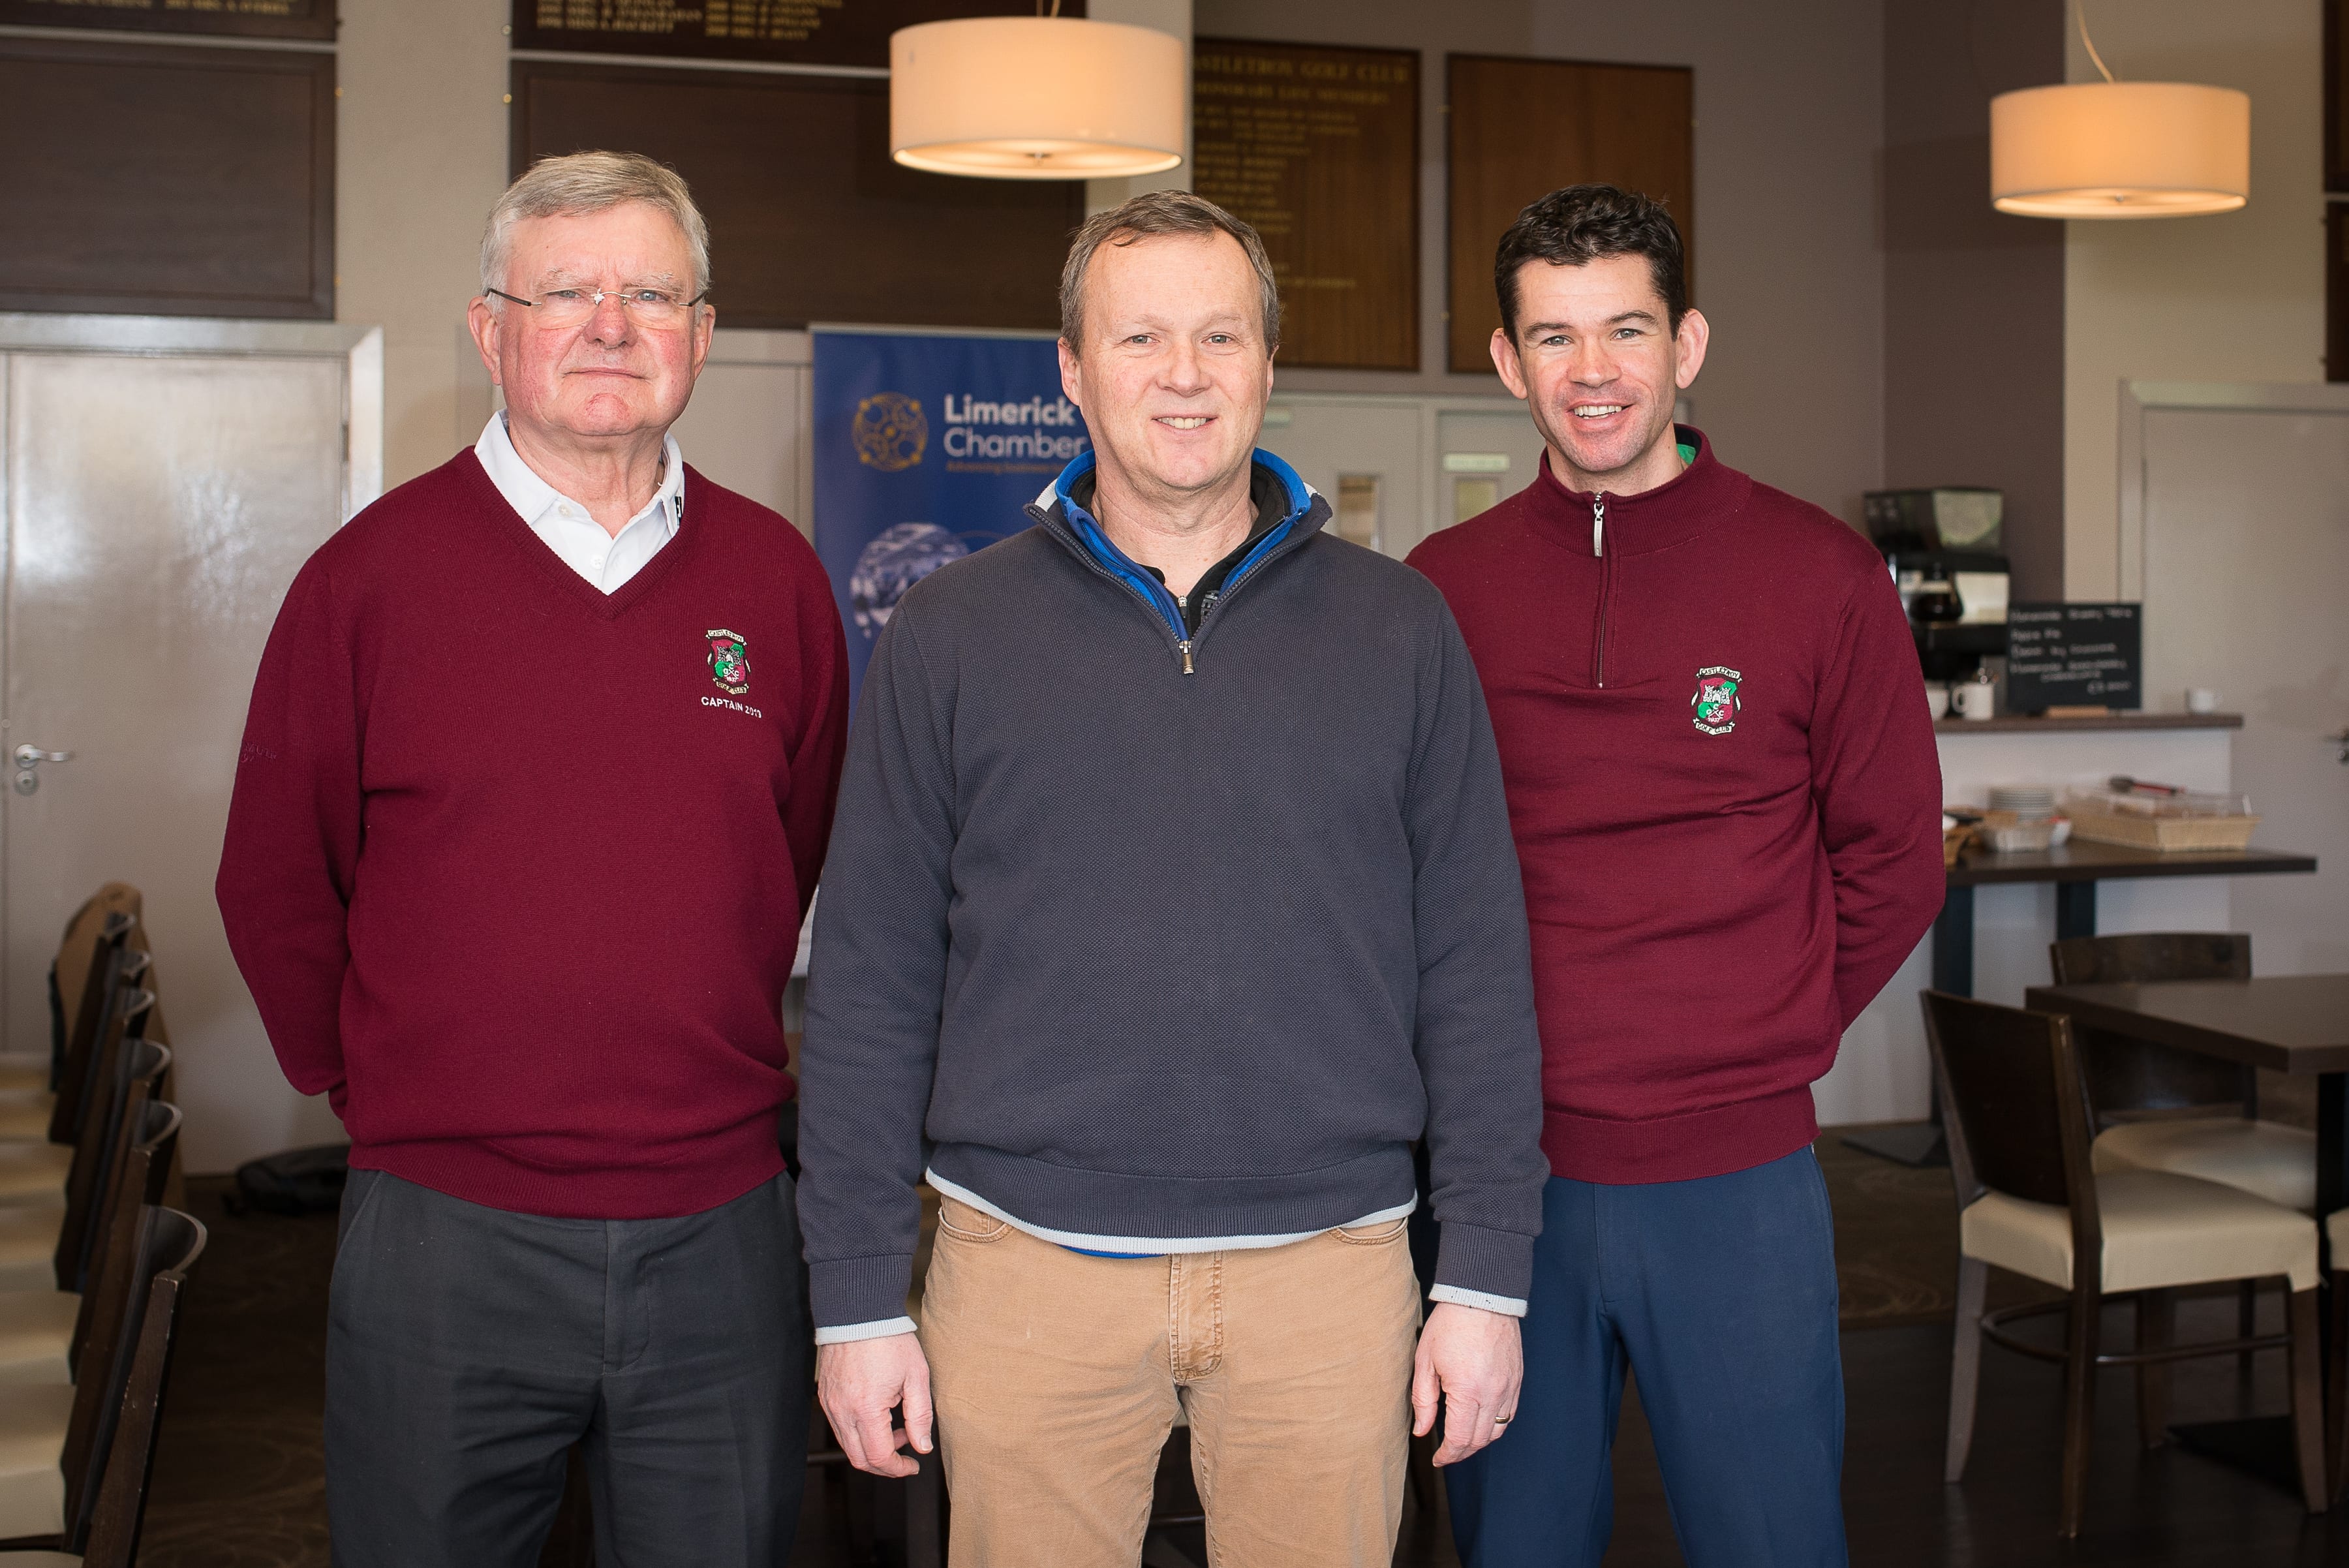 Limerick Chamber Go Golfing for Business Series
in association with the Castletroy Golf Club which took place in the Castletroy Golf Club  on Thursday 7th March 2019:  From left to right: Denis O’Sullivan - Club Captain Castletroy Golf Club, Paul Griffin - First Compliance,  Gary Howie - Castletroy Golf Club Pro Golfer. 
Image by Morning Star Photography